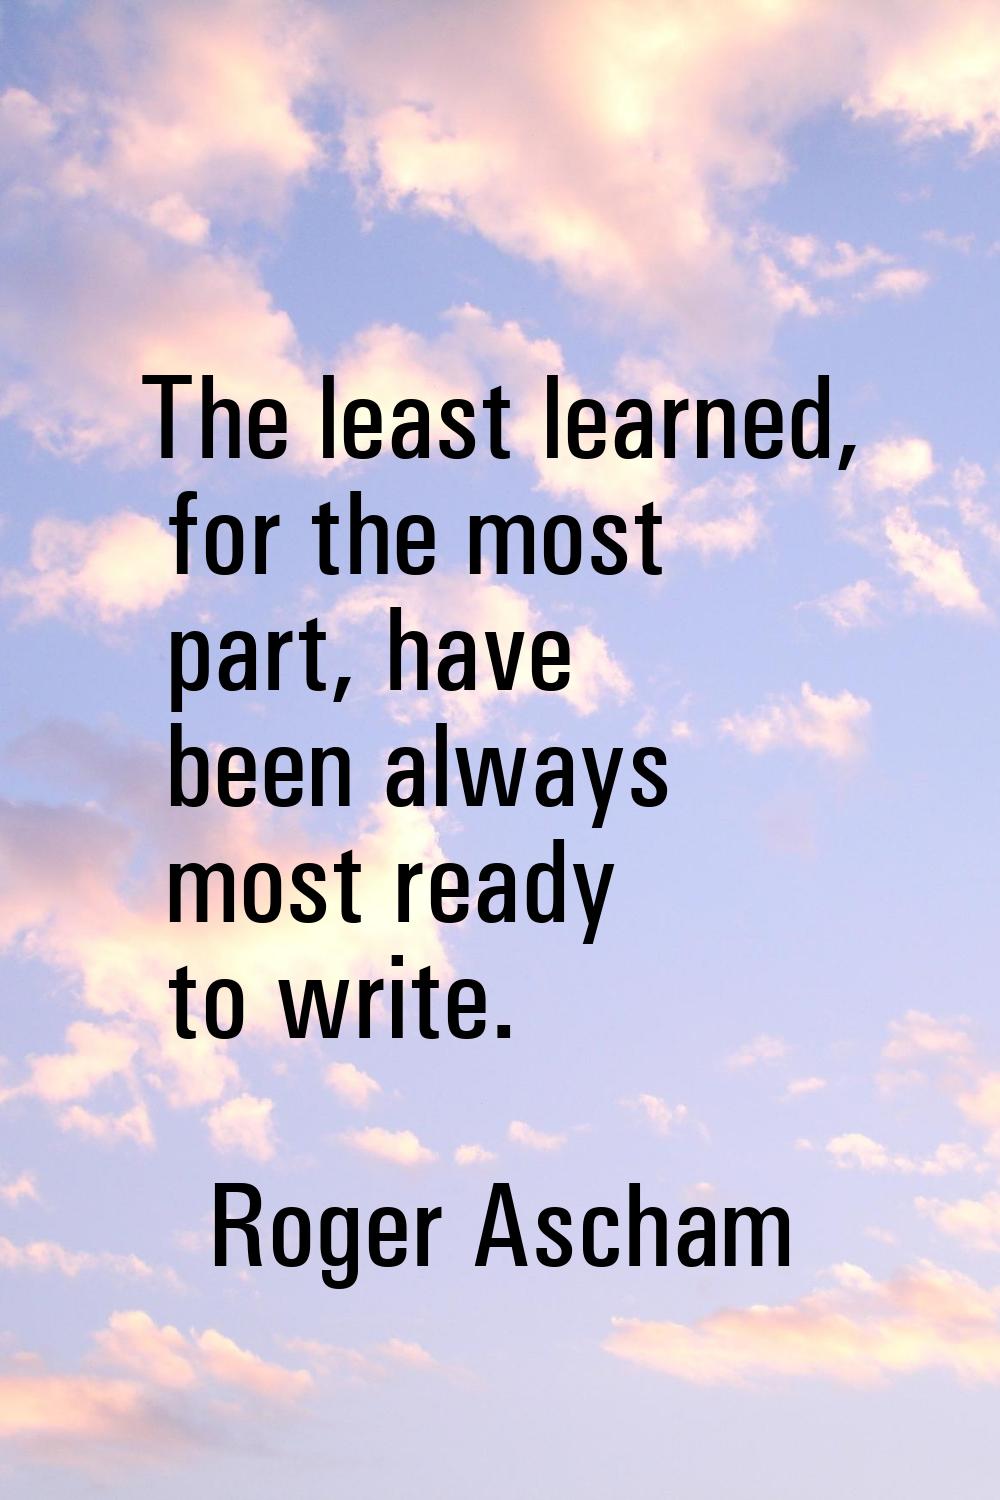 The least learned, for the most part, have been always most ready to write.